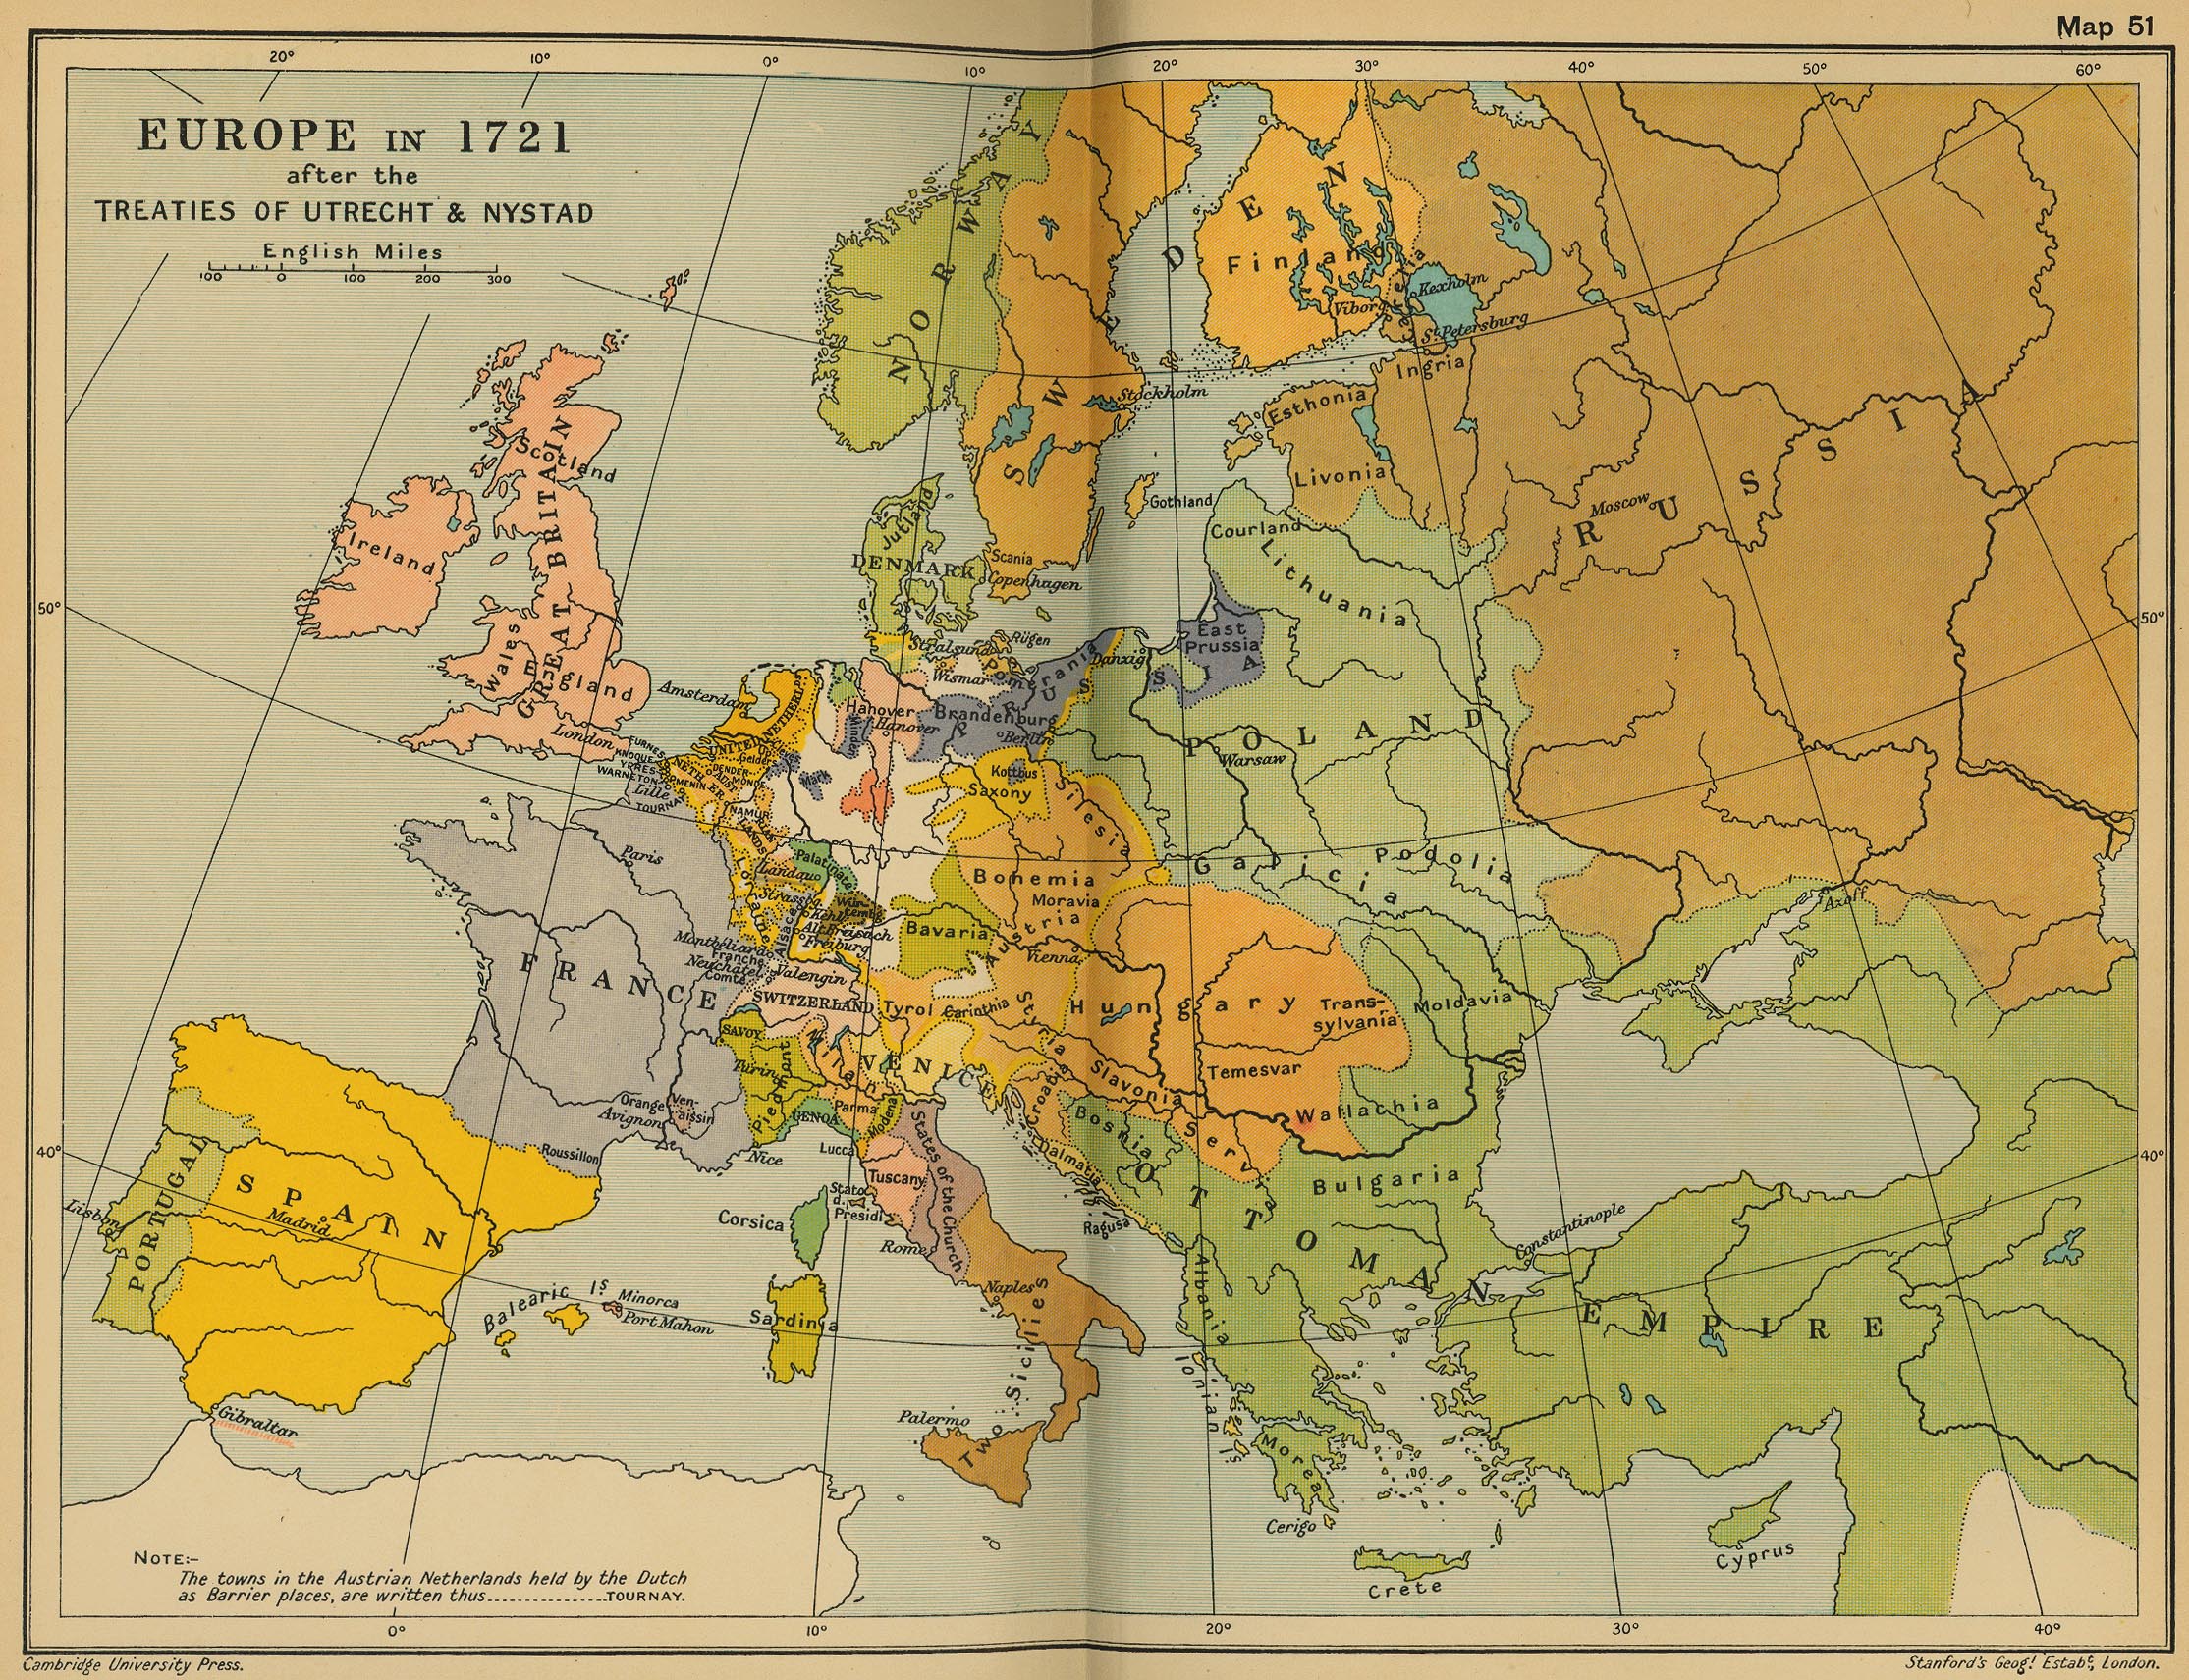 Map Of Europe In 1721 After The Treaties Of Utrecht And Nystad